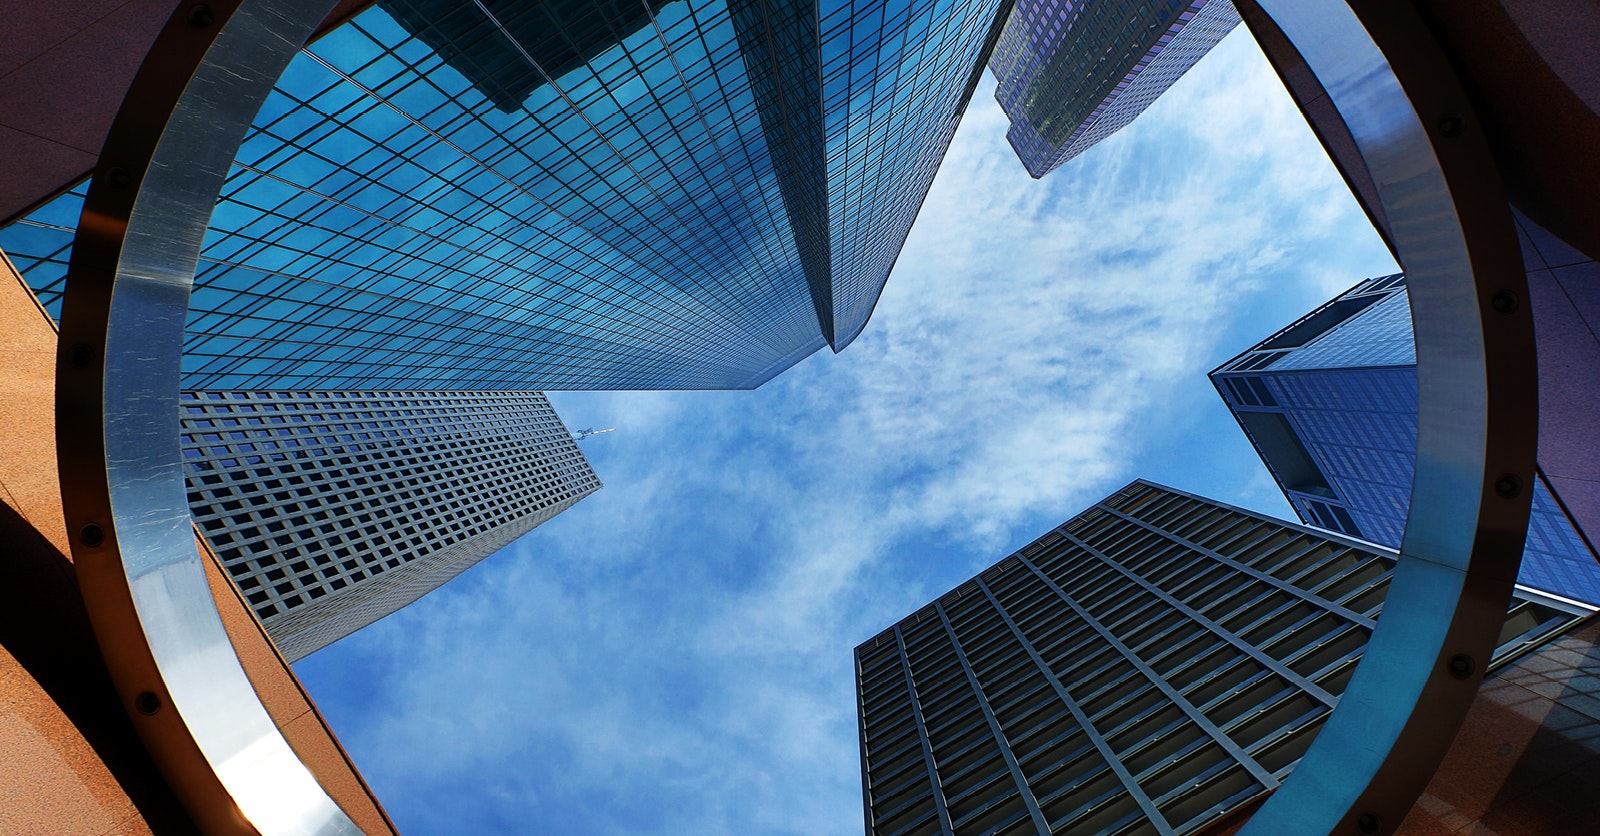 View from the ground looking up at the sky with buildings surrounding the blue sky